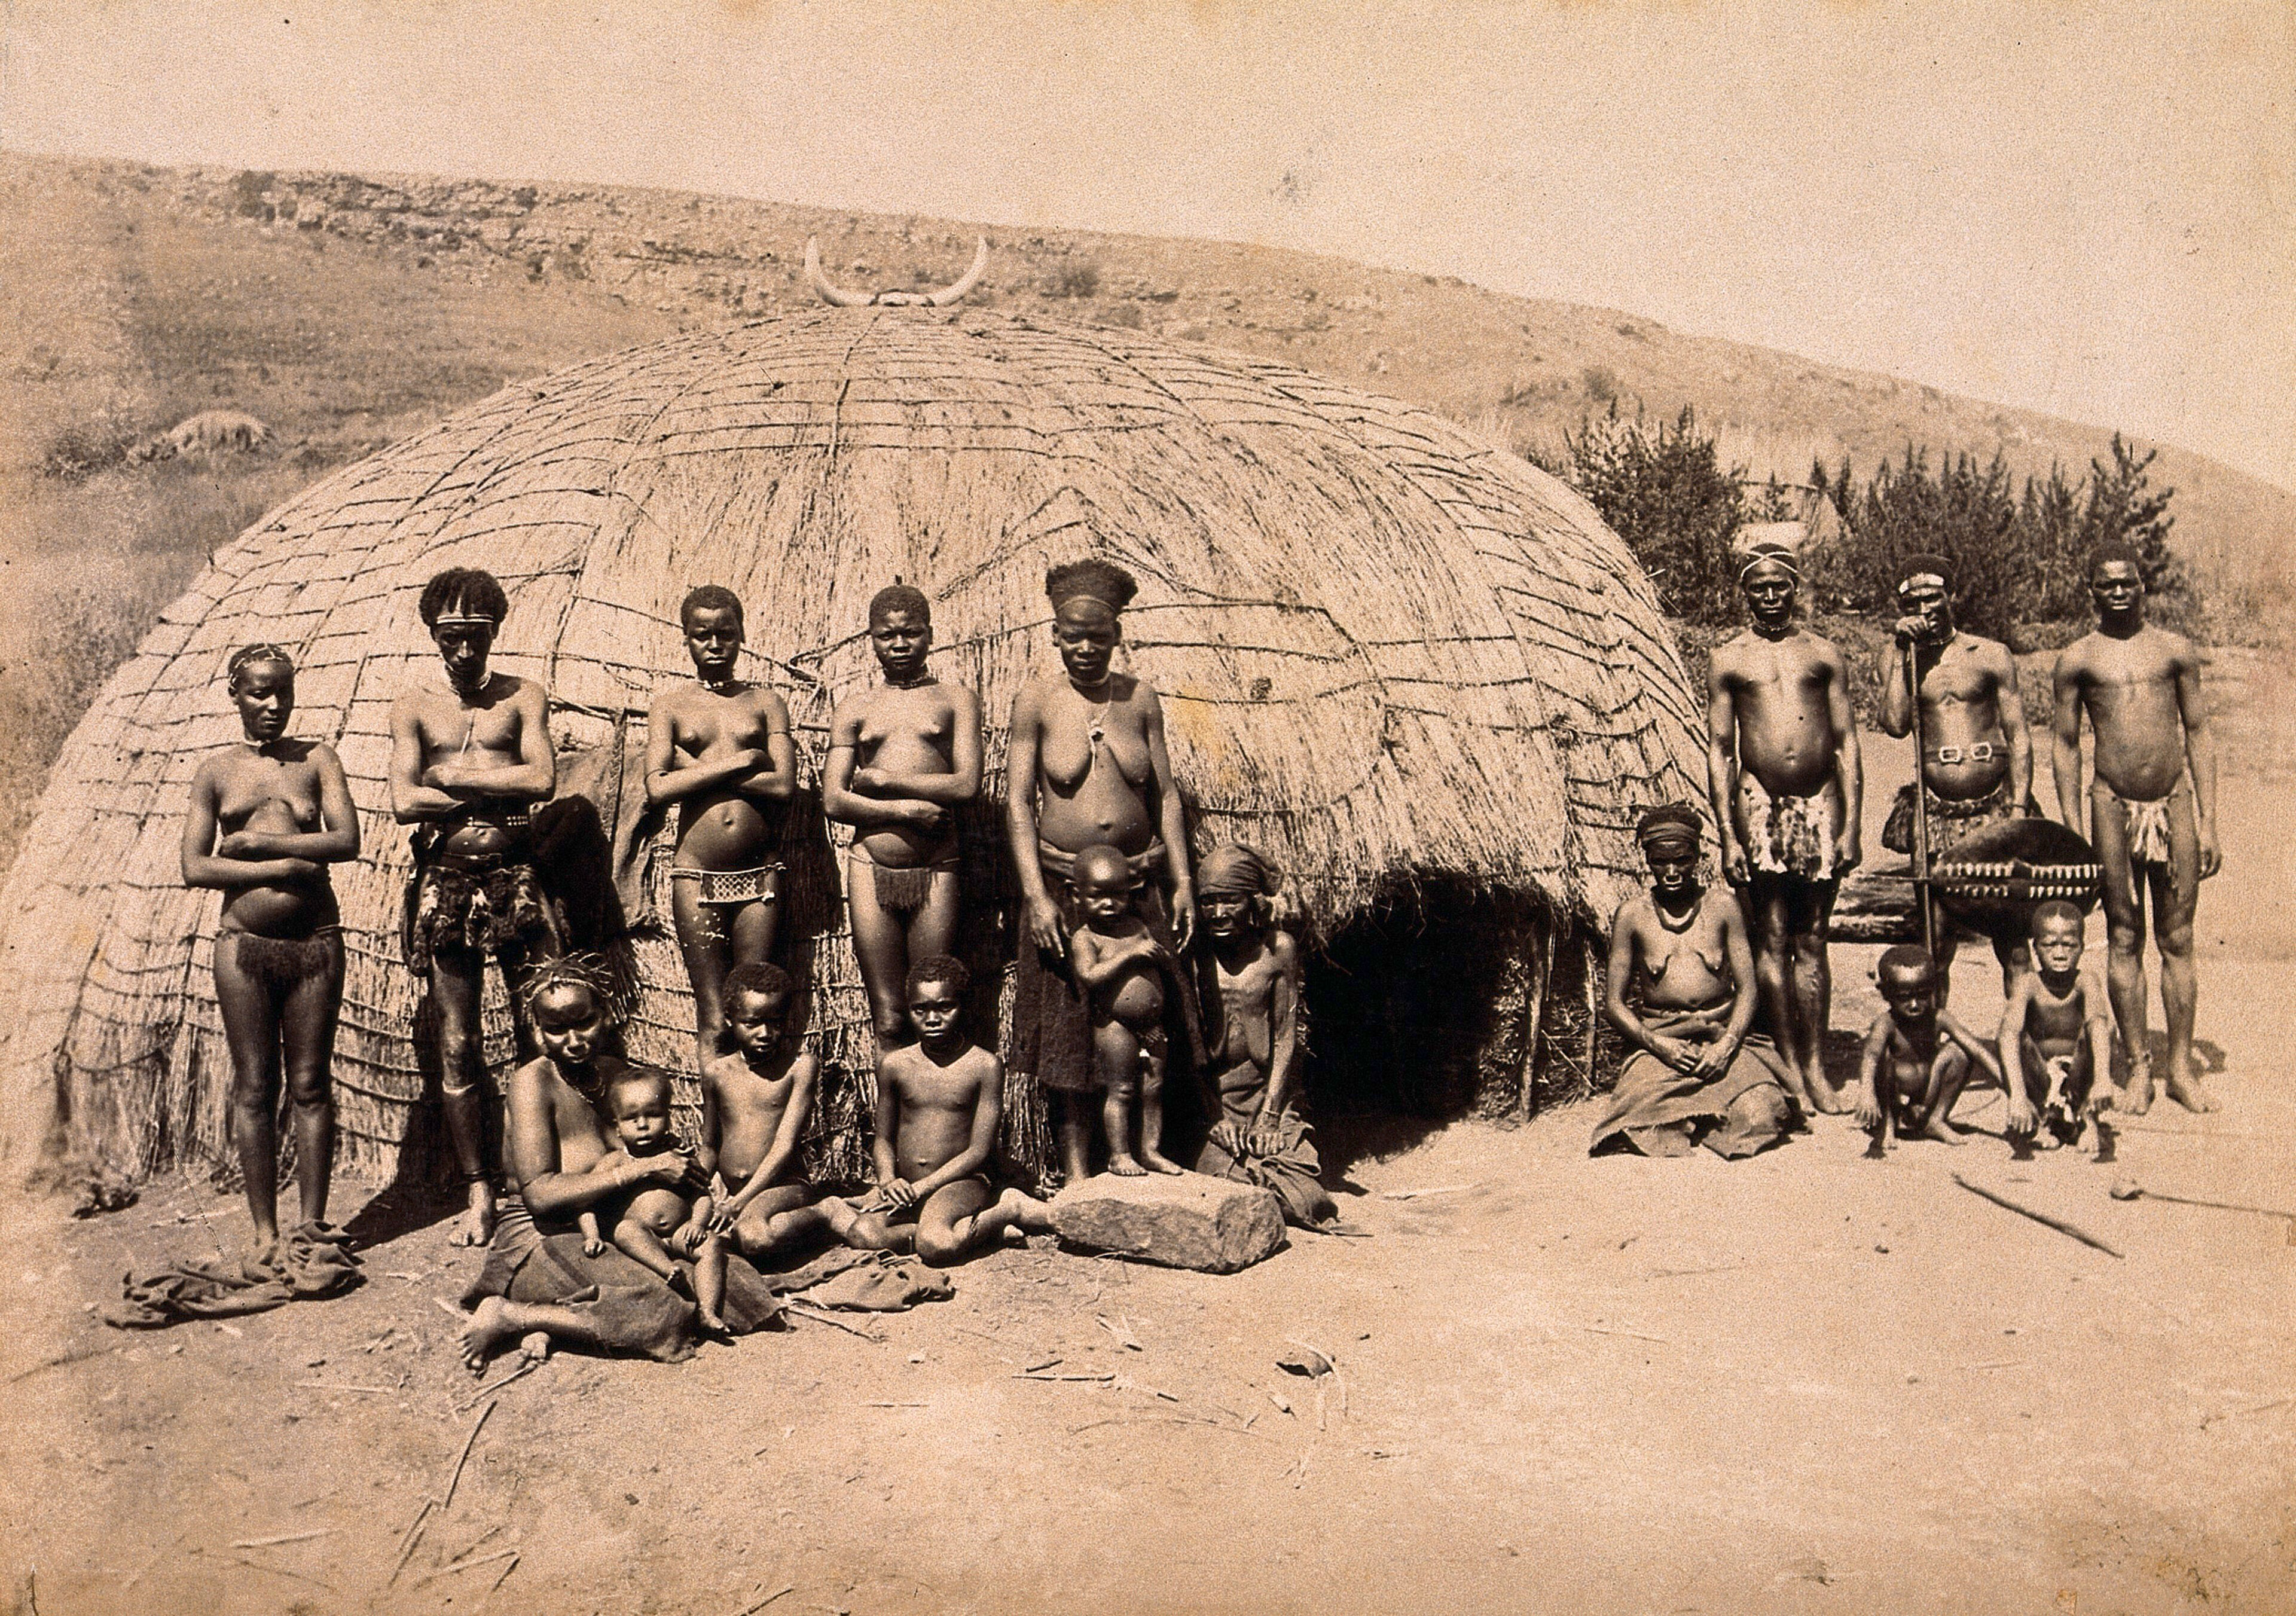 South Africa: Africans in front of a traditional kraal hut. Albumen print.